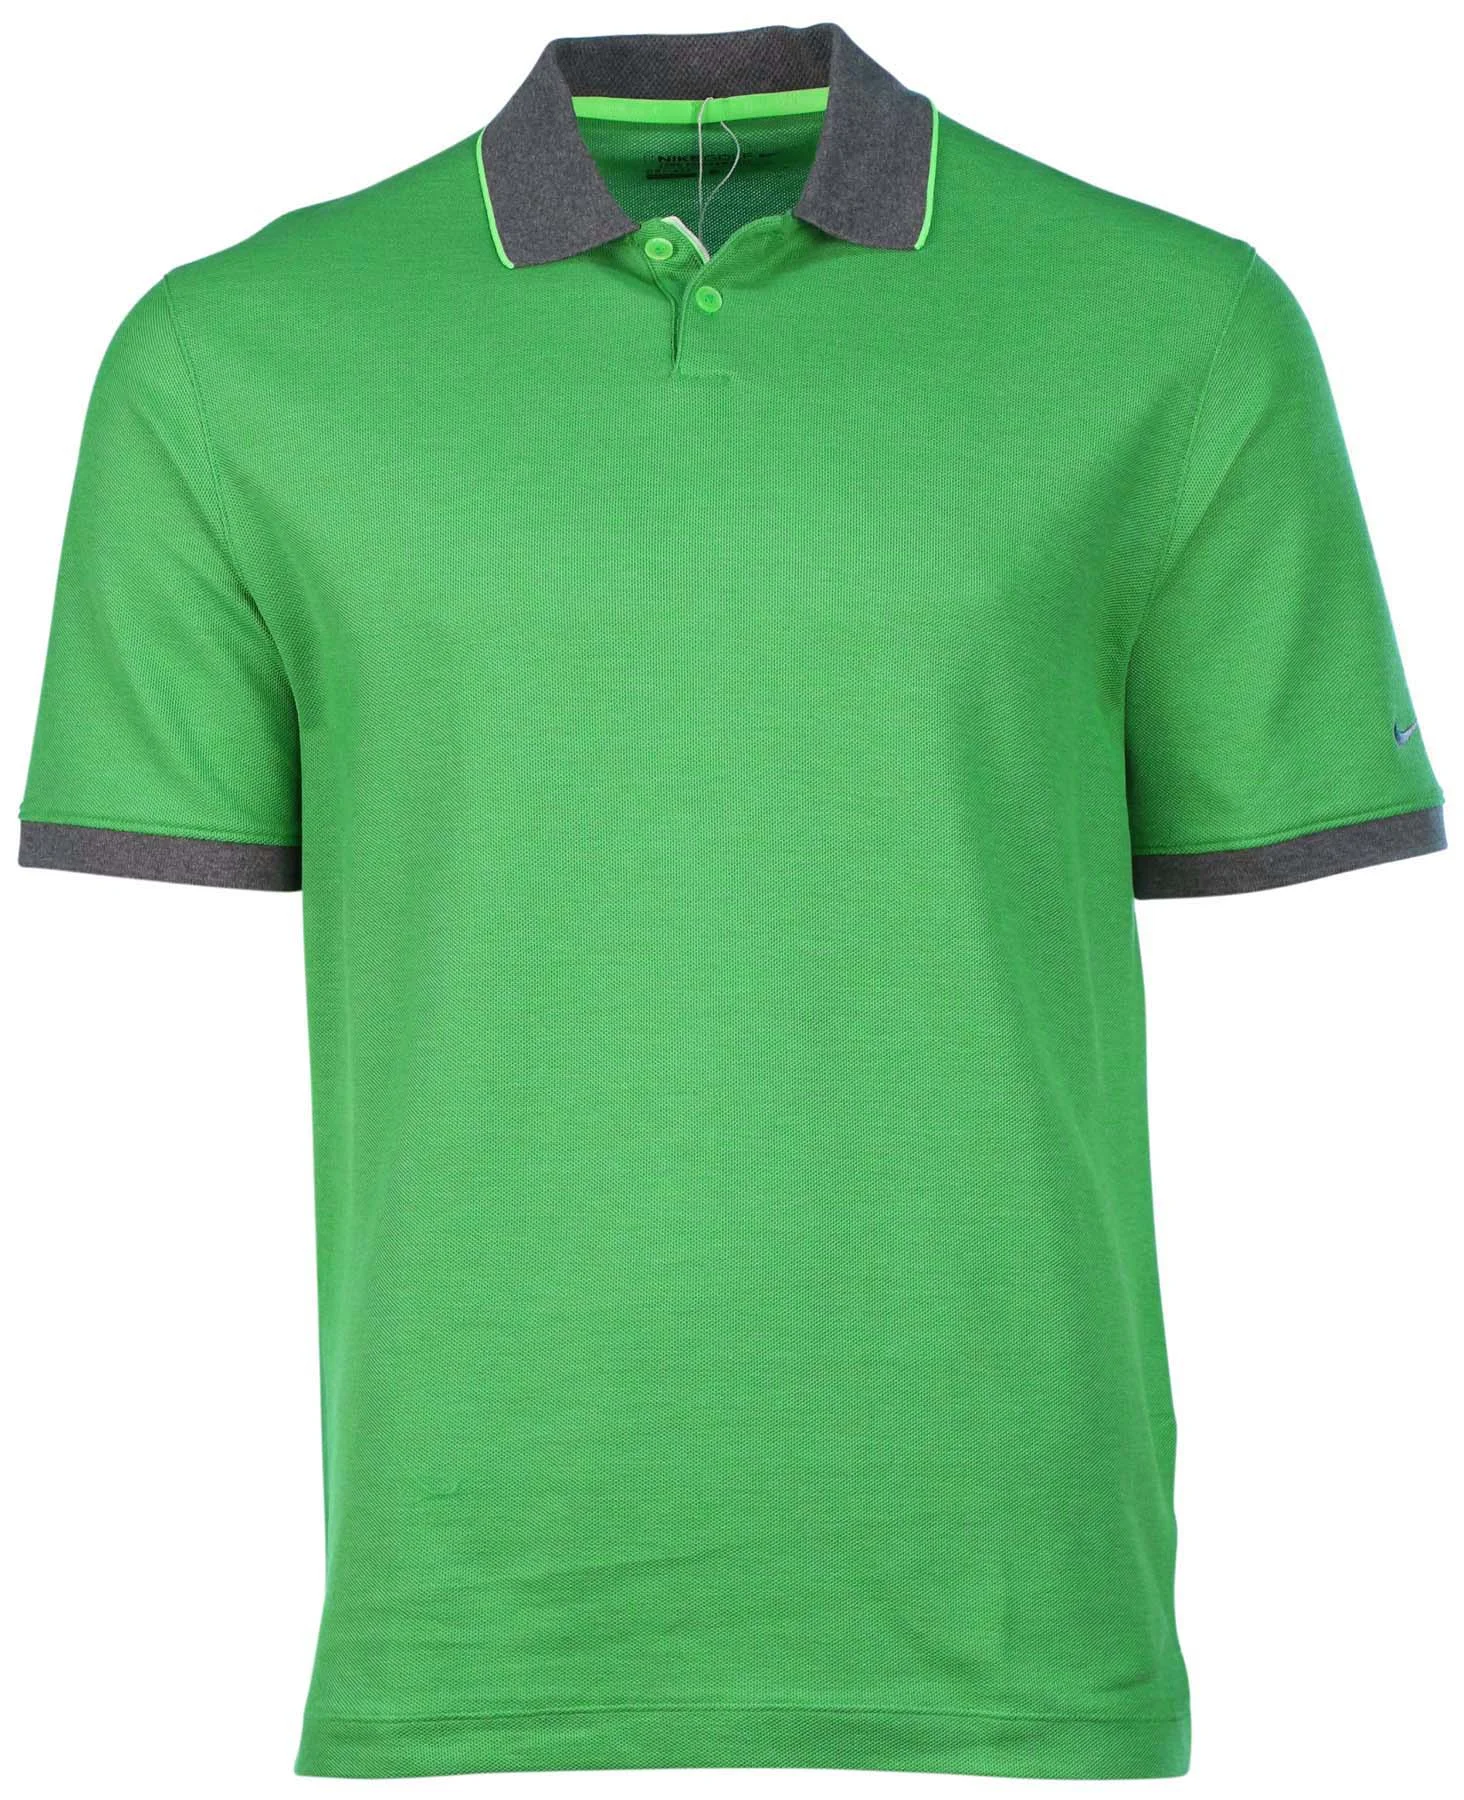 Uniform Dry Fit Polyester While Golf Polo Shirt Wholesale